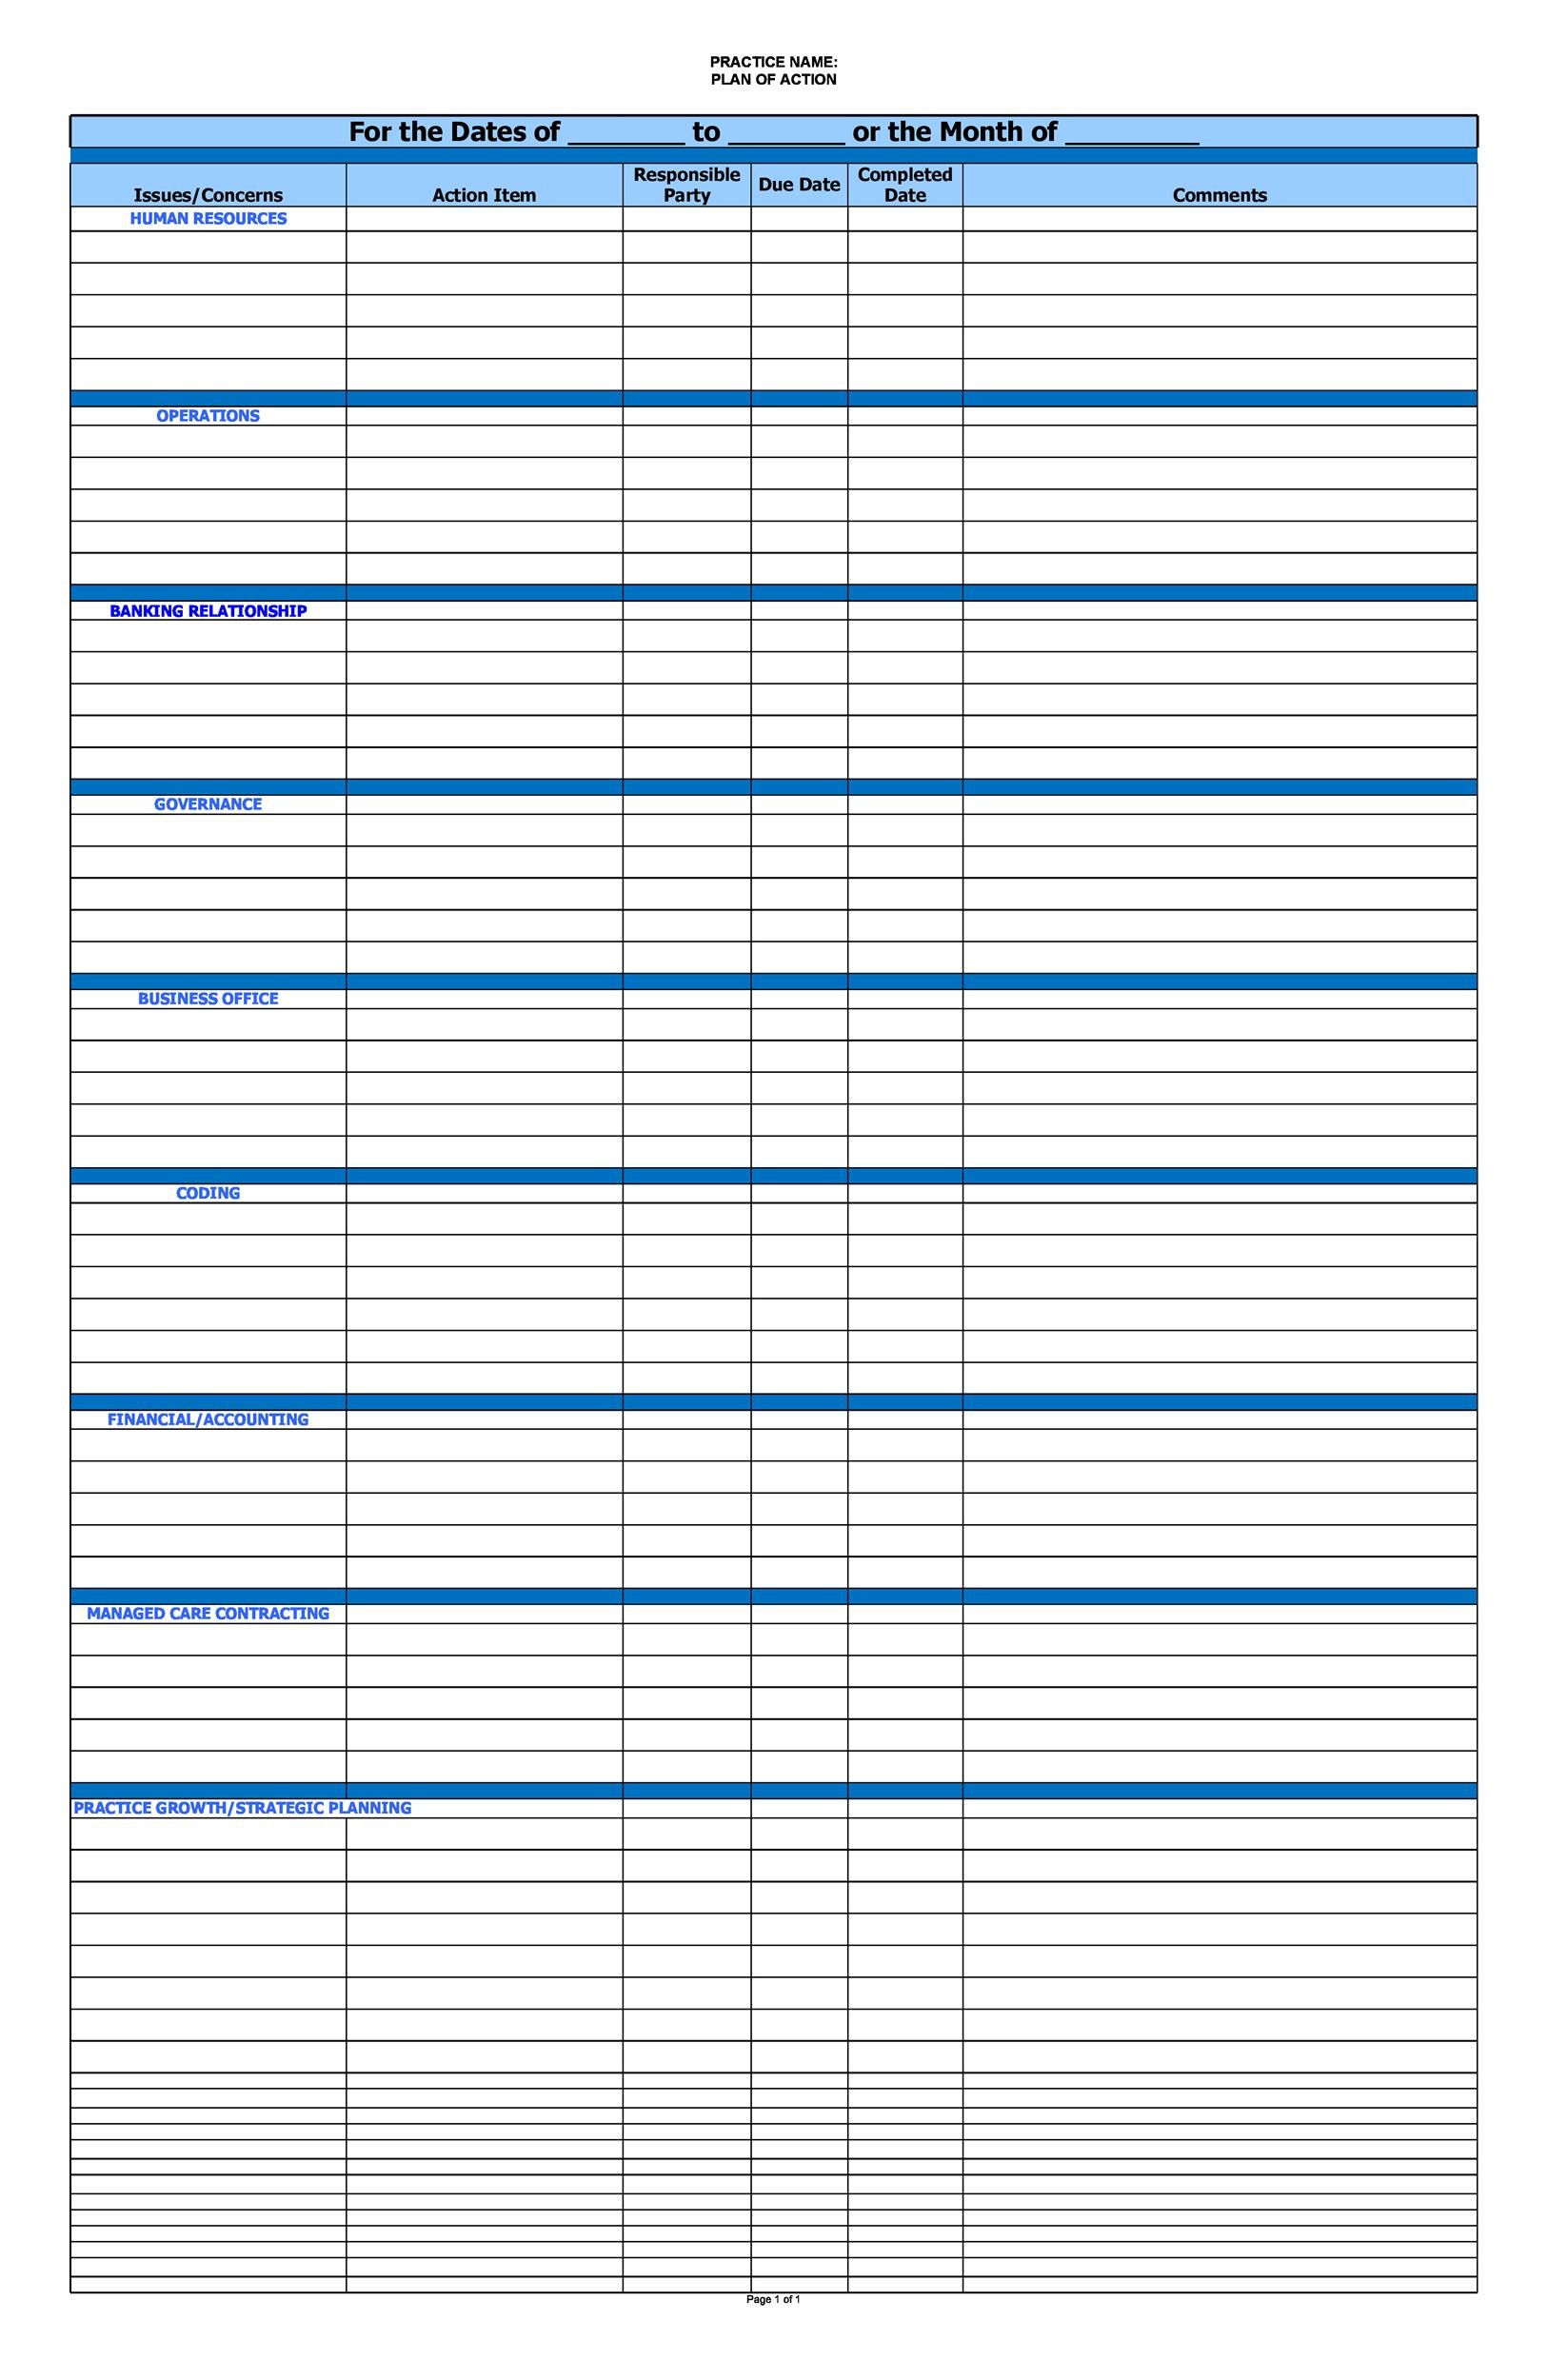 49 Great Action Item Templates (MS Word Excel) ᐅ TemplateLab